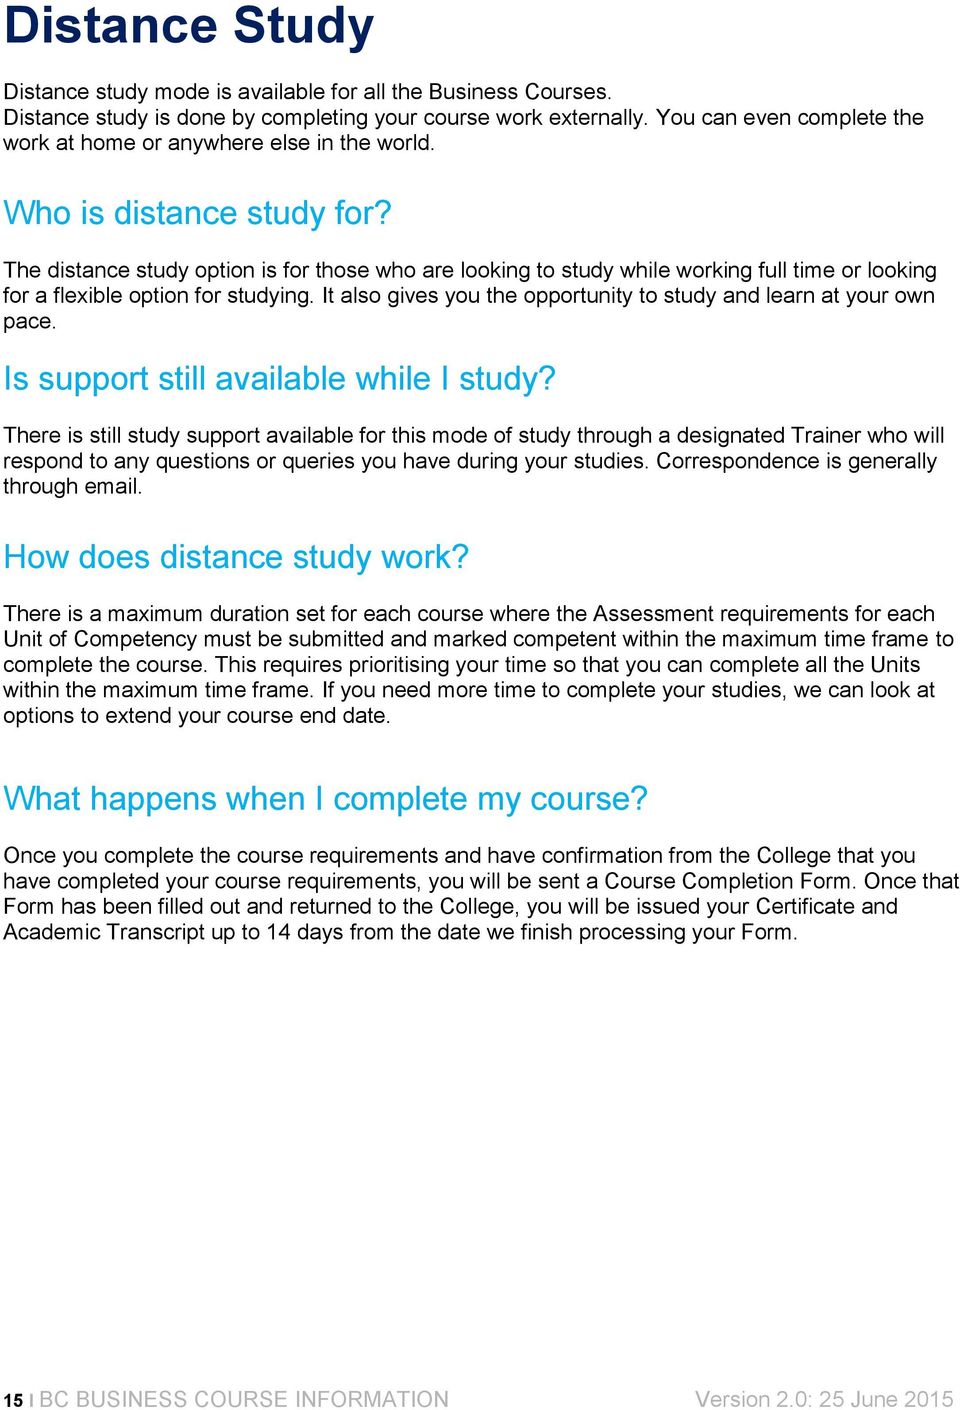 The distance study option is for those who are looking to study while working full time or looking for a flexible option for studying.